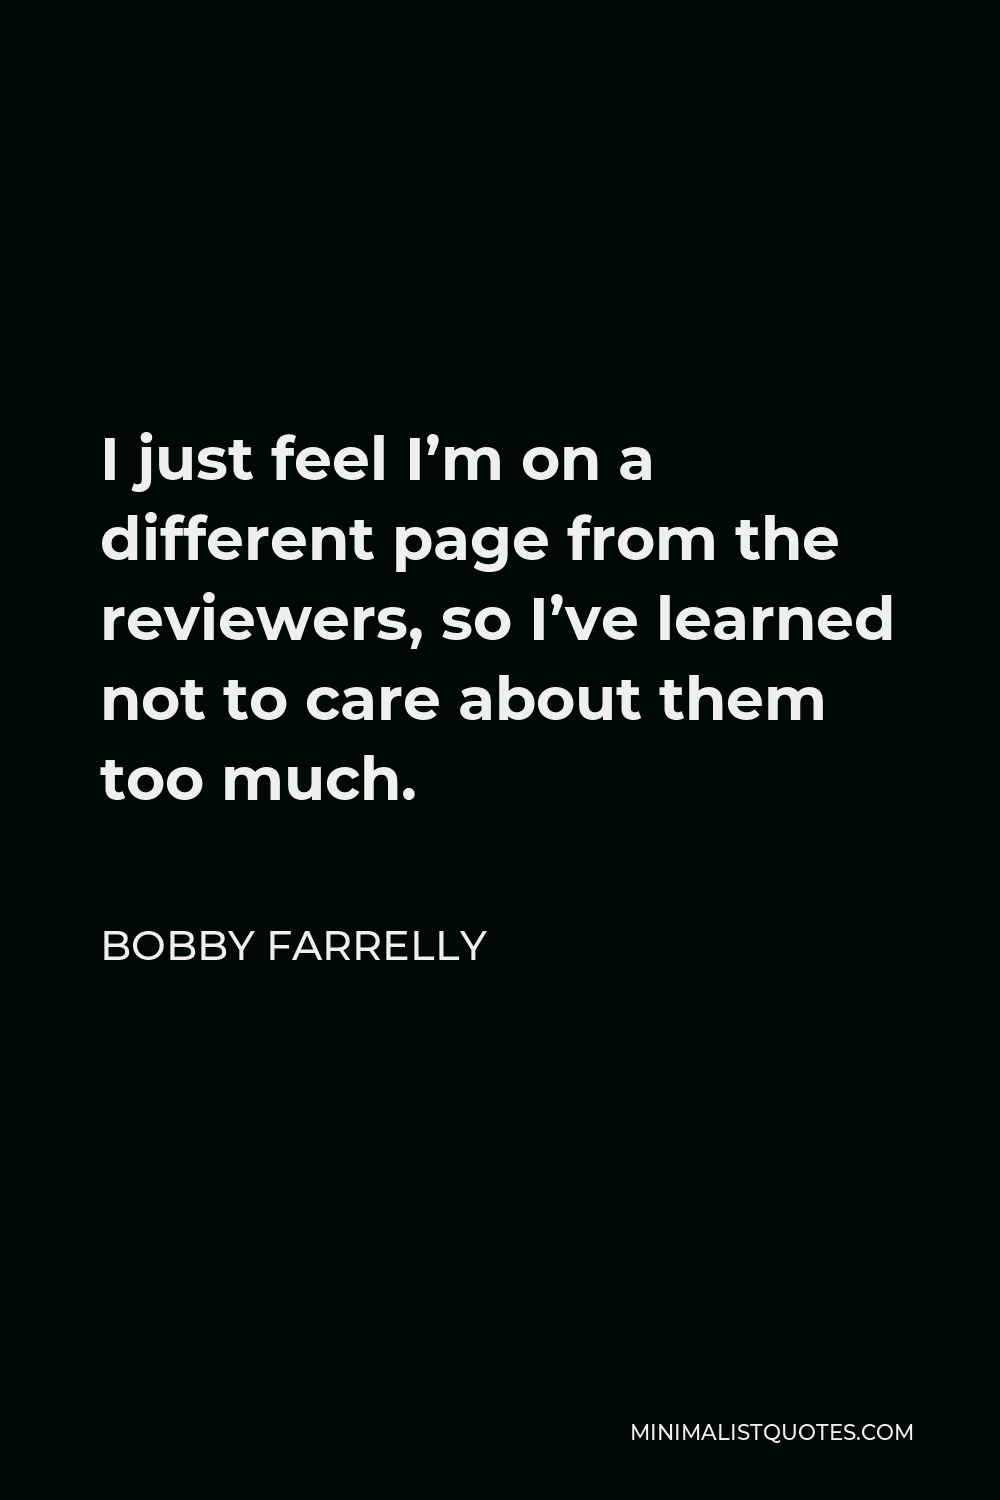 Bobby Farrelly Quote - I just feel I’m on a different page from the reviewers, so I’ve learned not to care about them too much.